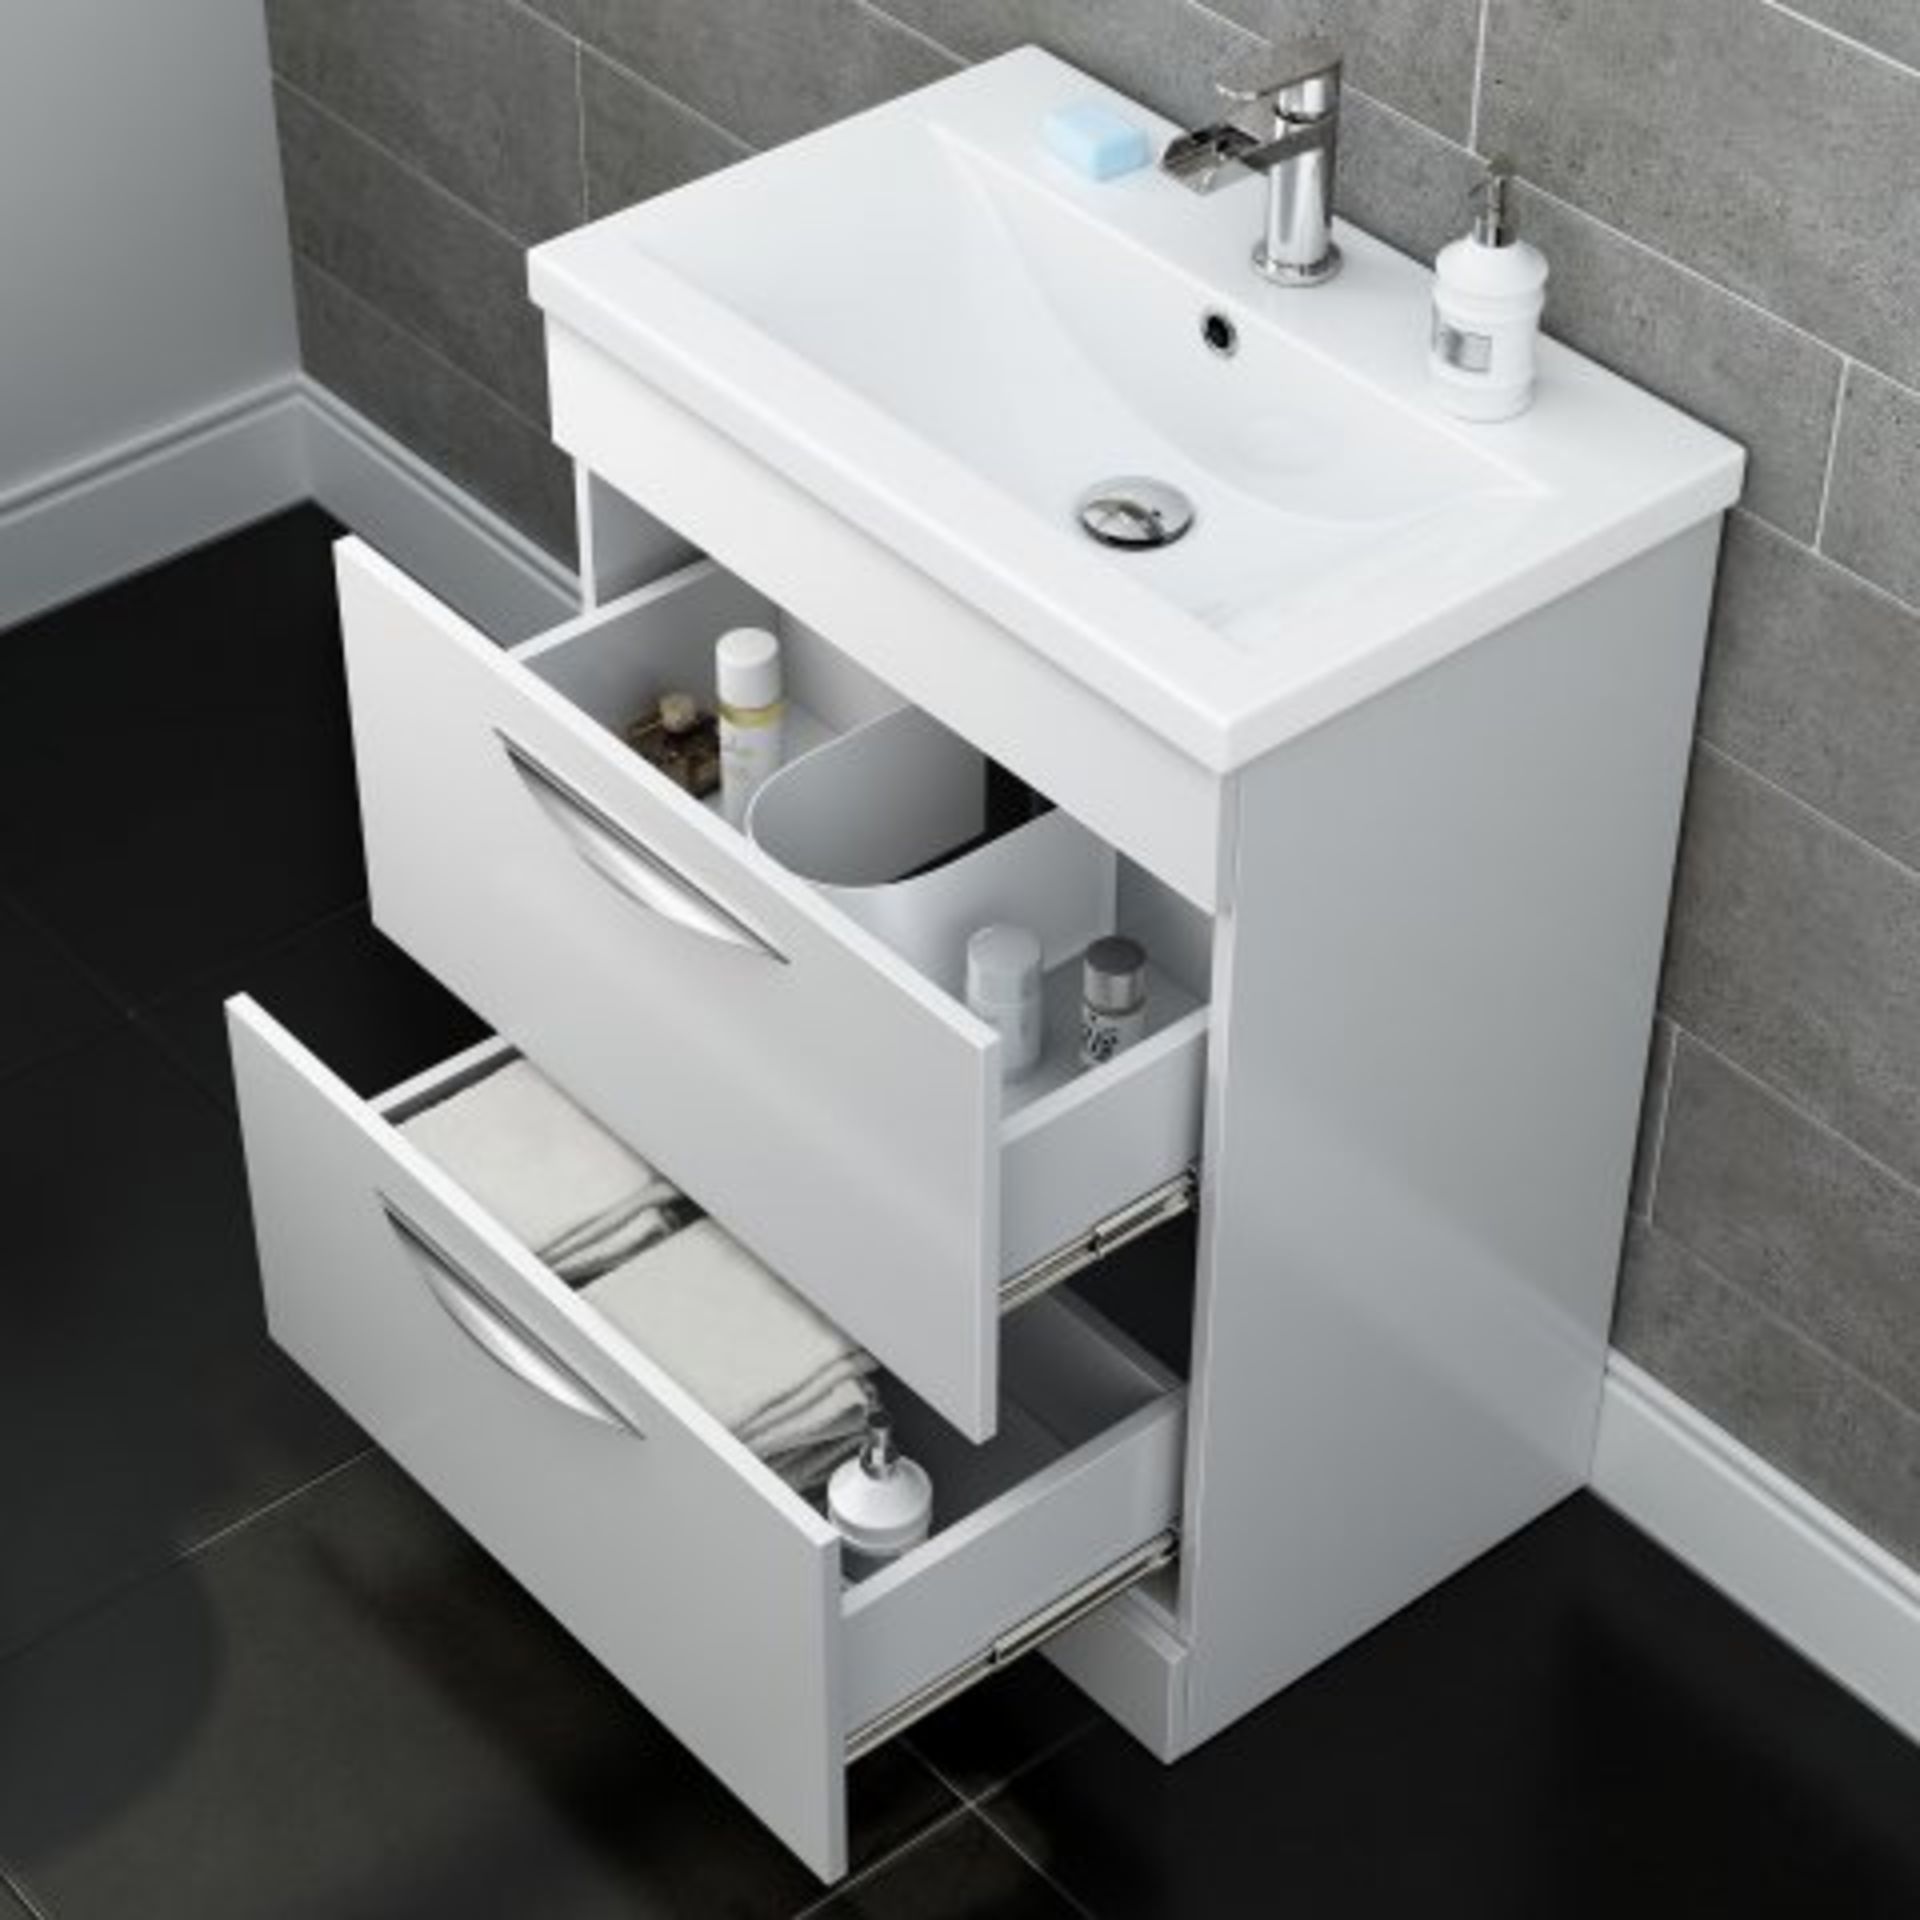 (SKU21) 600mm Severn High Gloss White Double Drawer Basin Cabinet - Floor Standing. RRP £269.99. - Image 2 of 3